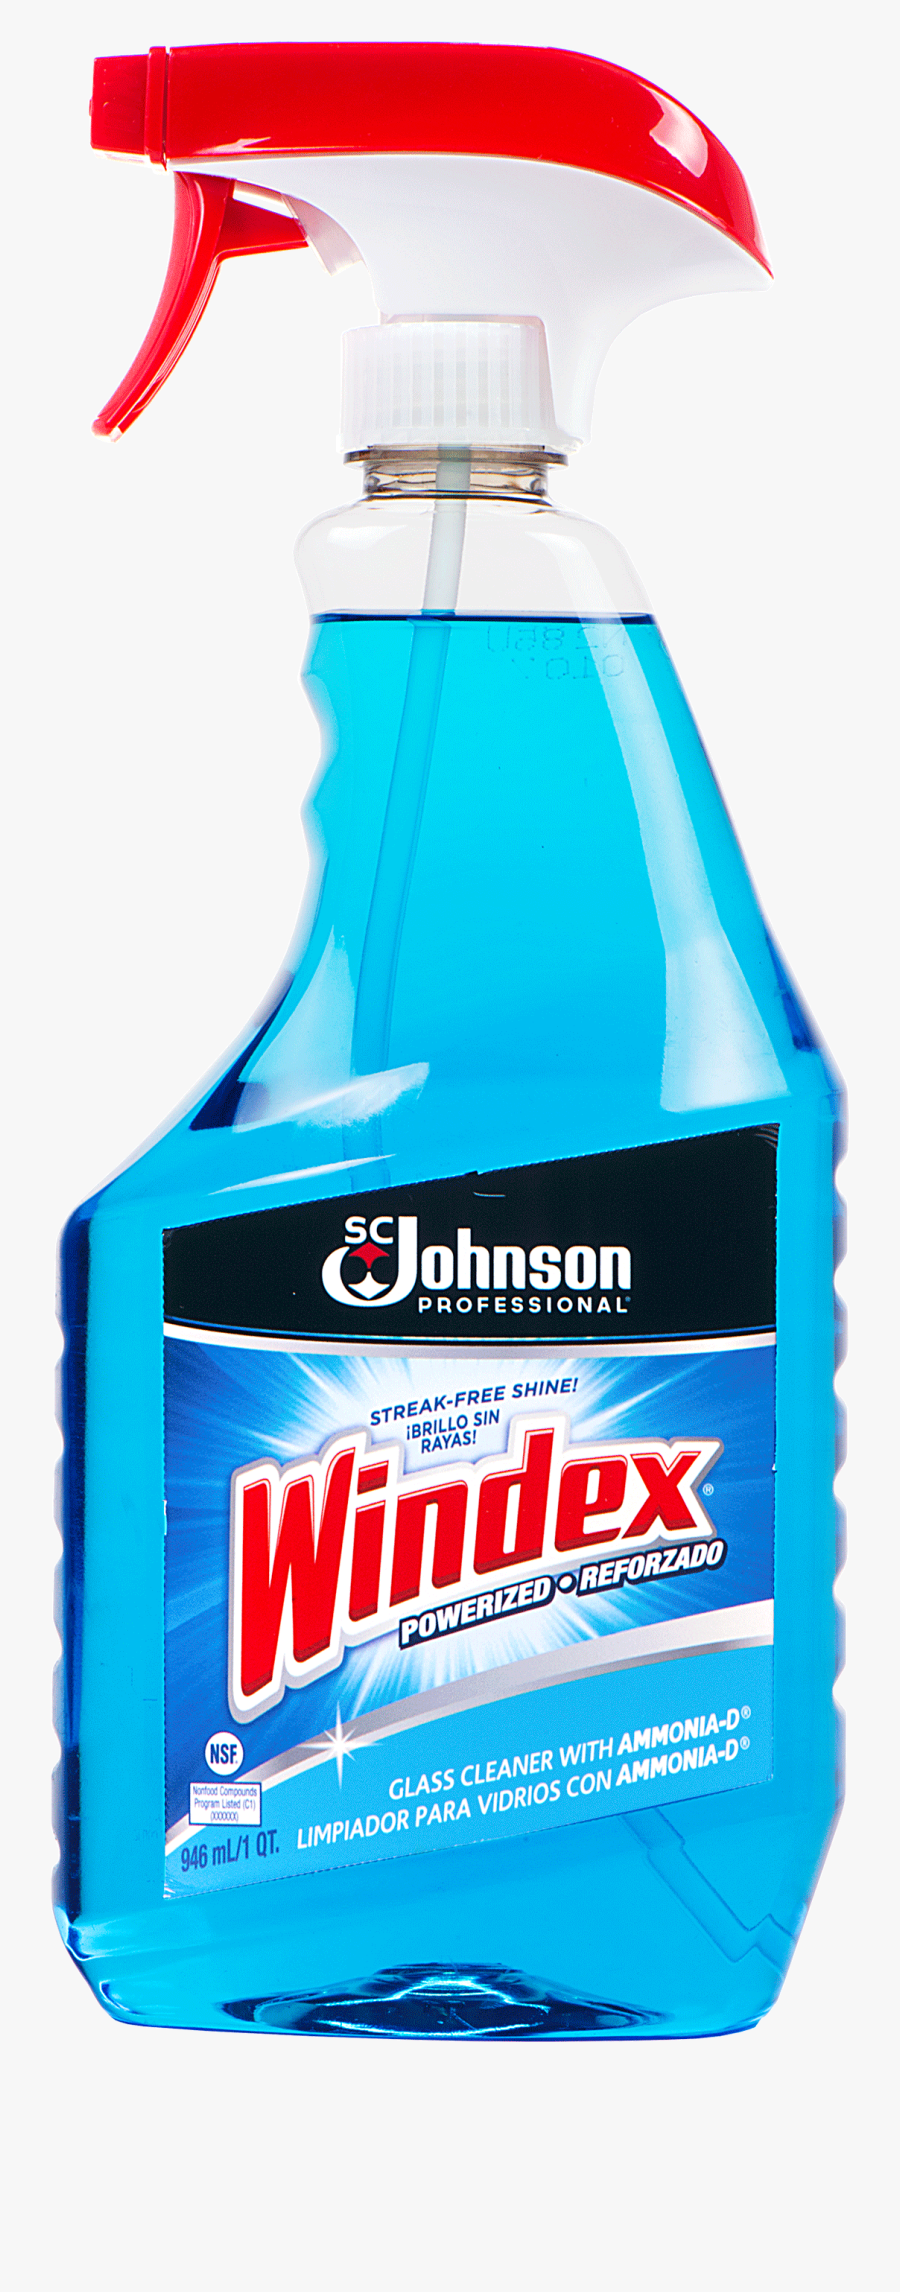 Cleaning Wood Floors With - Windex Glass Cleaner Rtu, Transparent Clipart